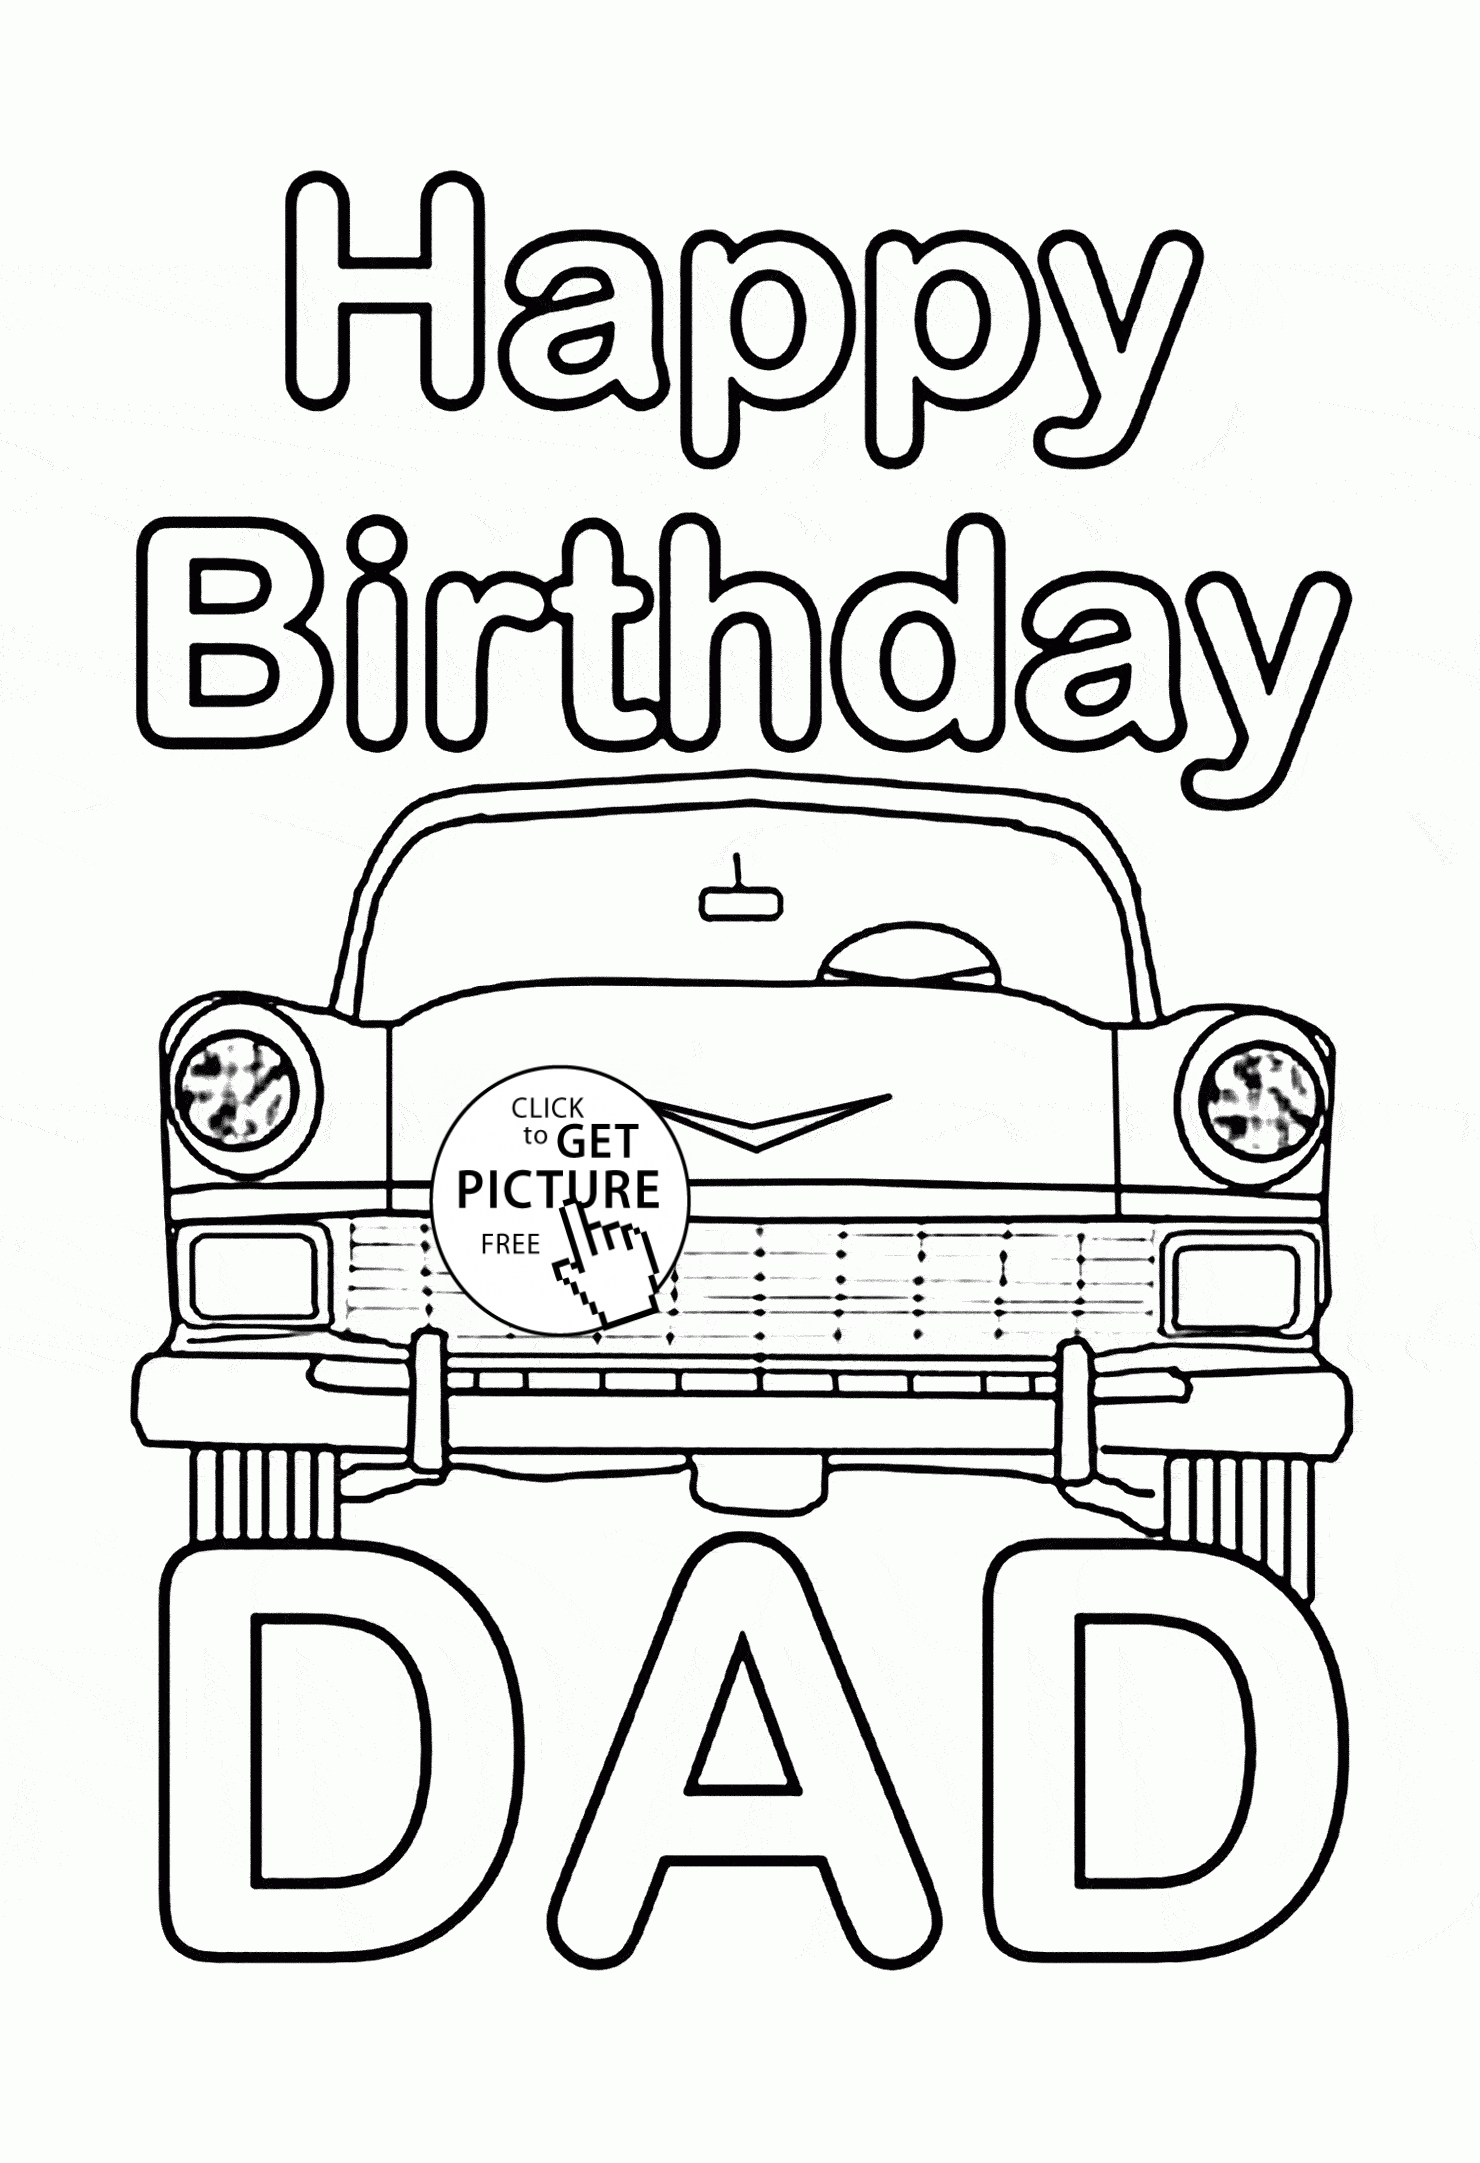 printable coloring birthday cards for dad happy birthday daddy printable birthday card happy dad coloring for birthday cards printable 